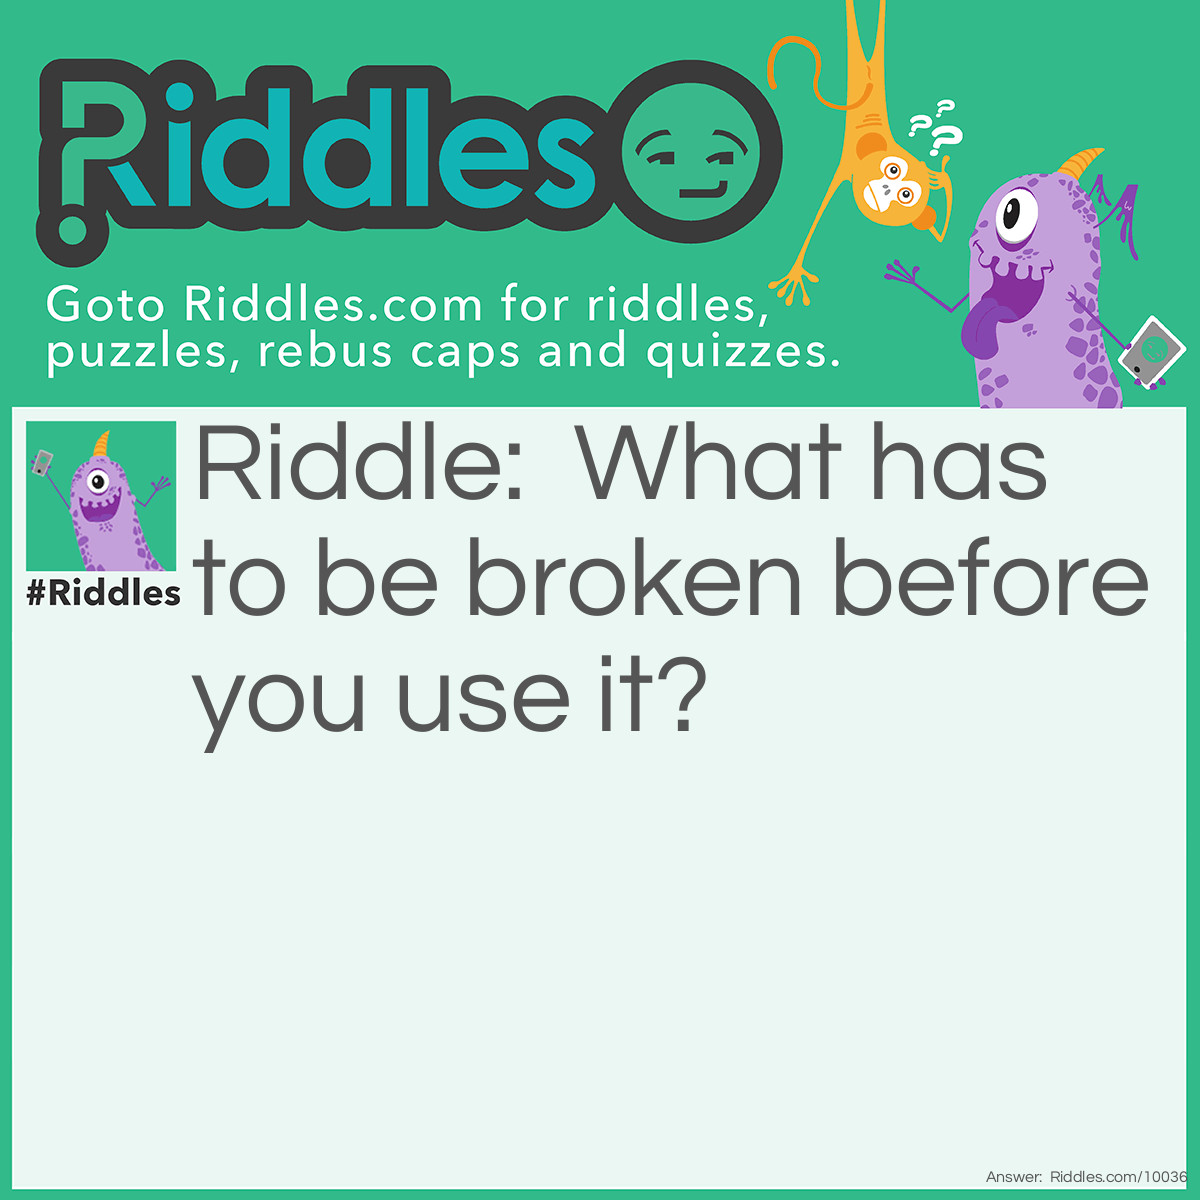 Riddle: What has to be broken before you use it? Answer: Eggs.